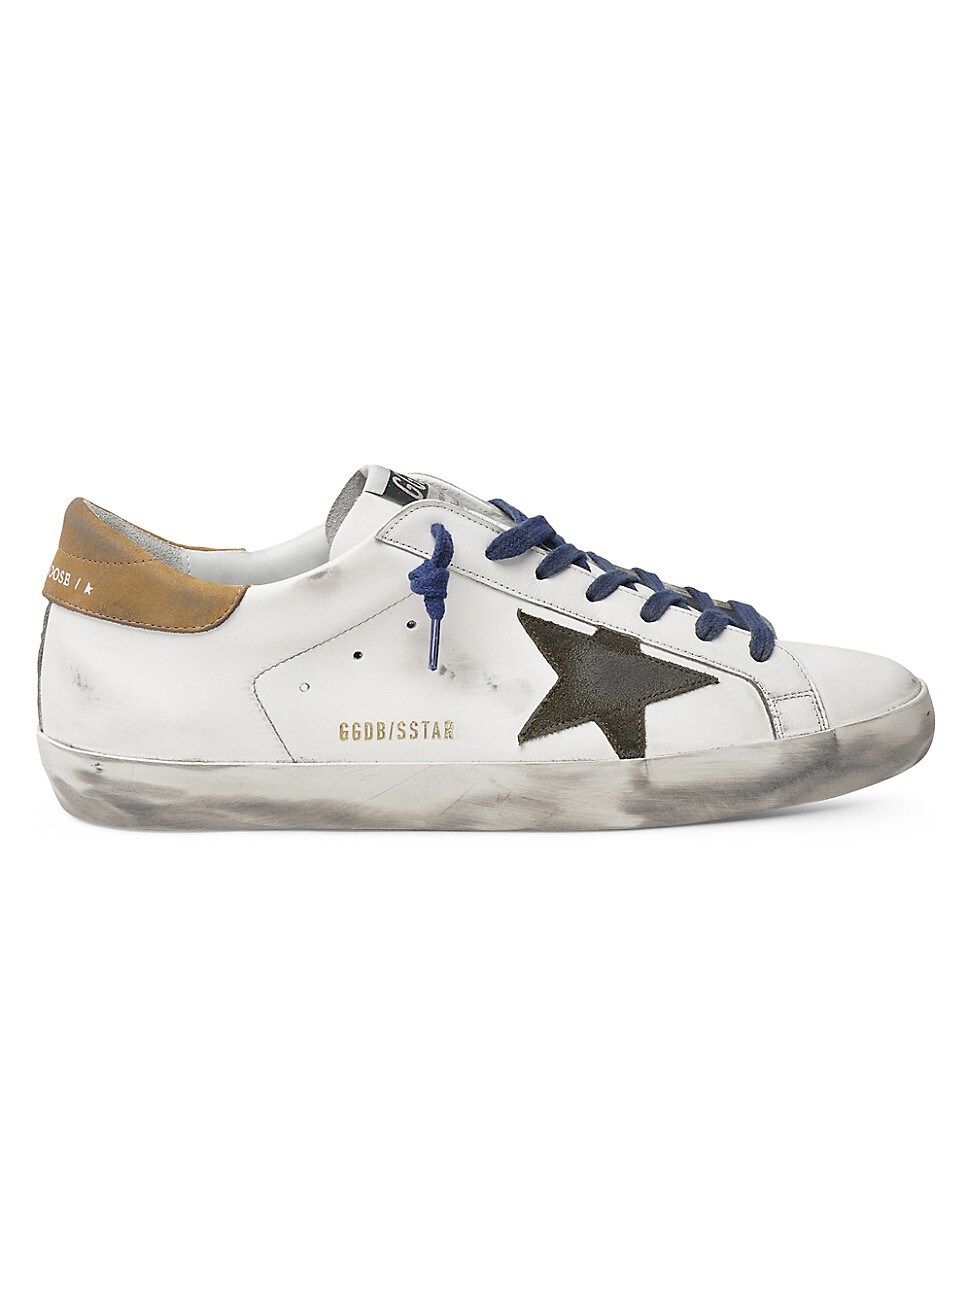 Golden Goose Deluxe Brand Men's Superstar Leather Sneakers - White Drill Green Brown - Size 8 | Saks Fifth Avenue